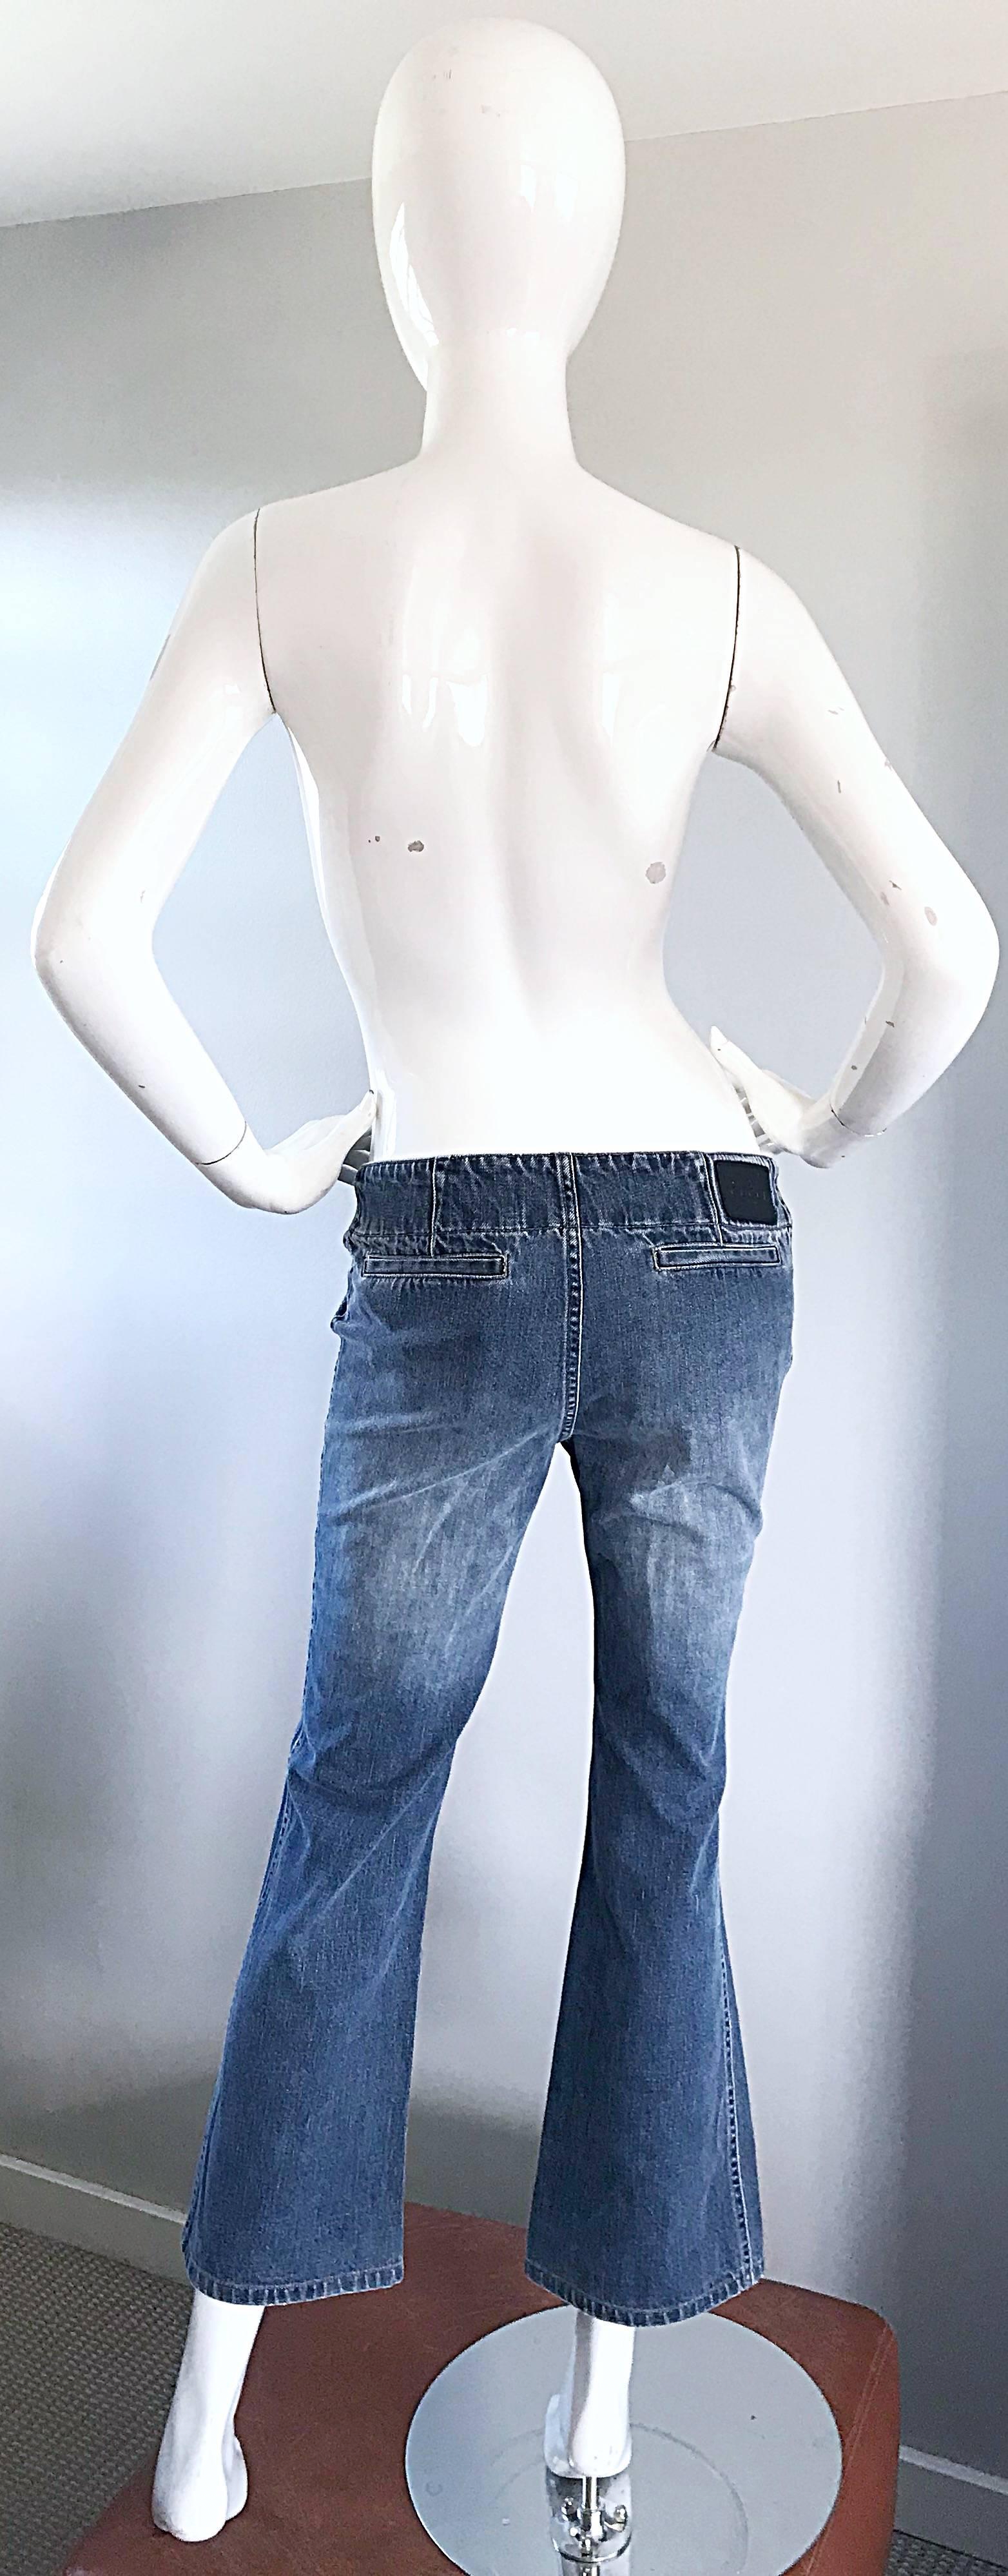 Tom Ford for Gucci Size 6 Low Rise Blue Jeans Denim Flare Leg Cropped Culottes  For Sale 1